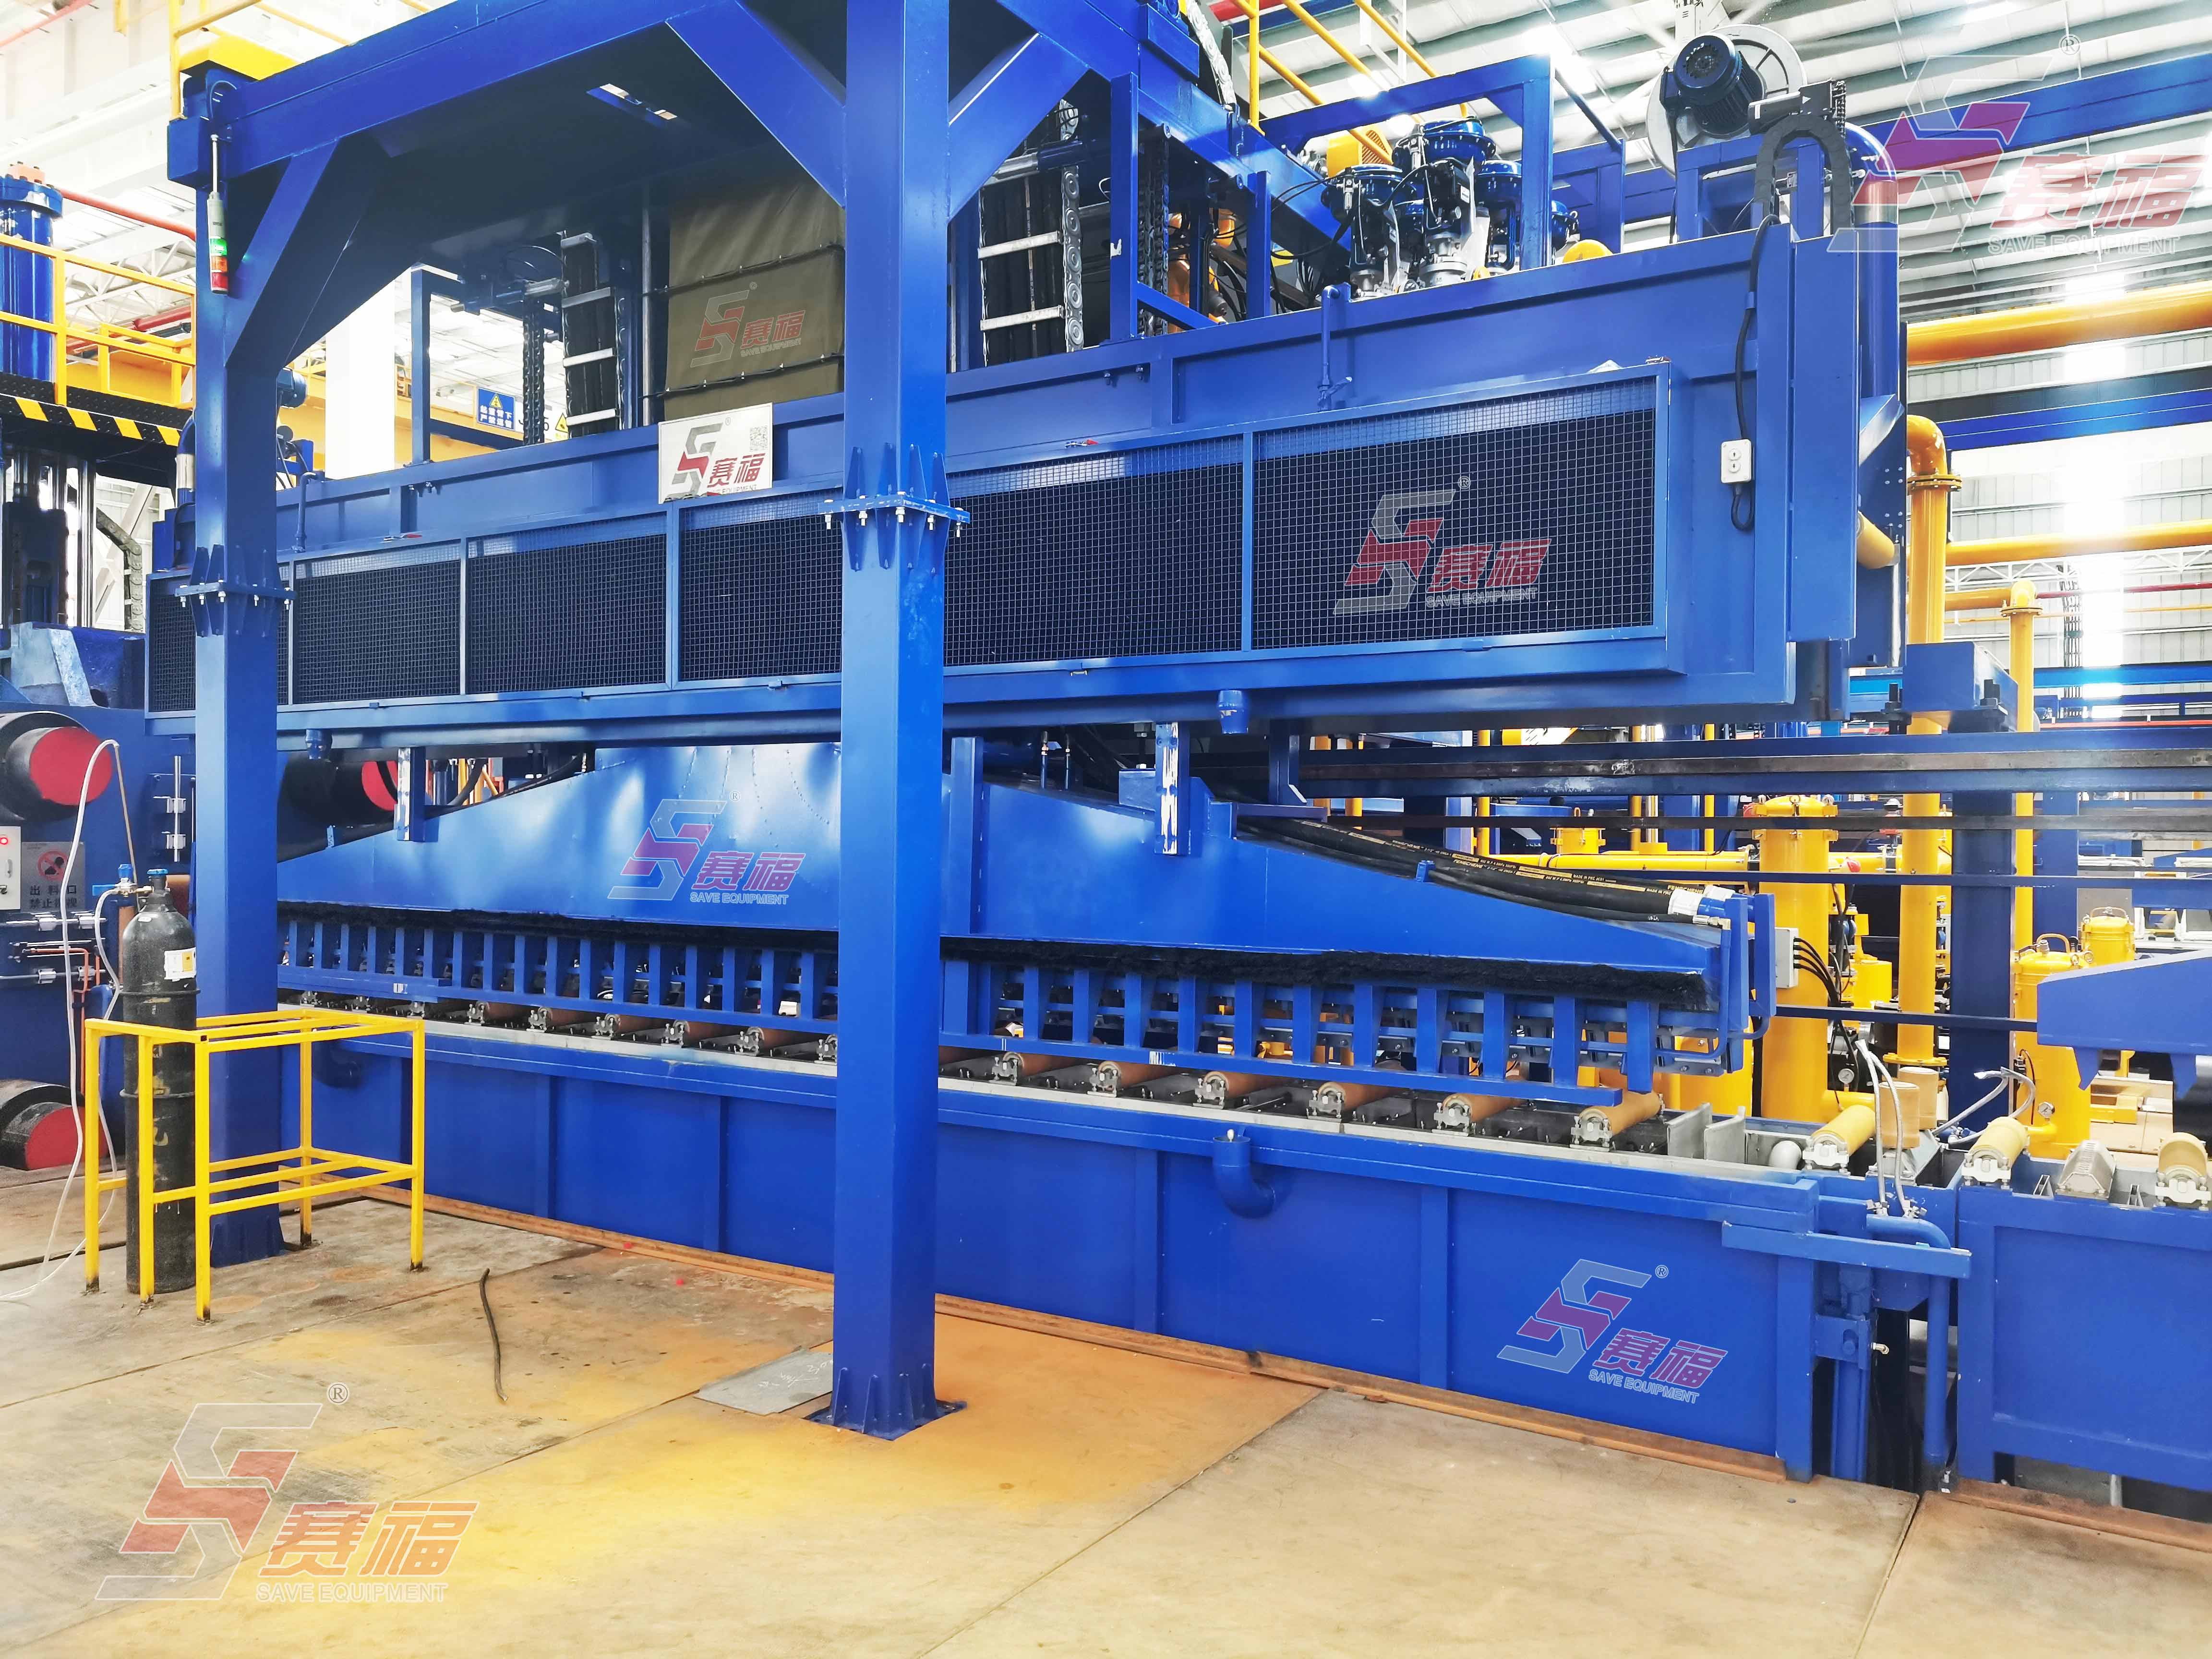 Celebrate the quenching equipment HM1650 of Guangdong Haomei finished assembly and starting to produce successfully .